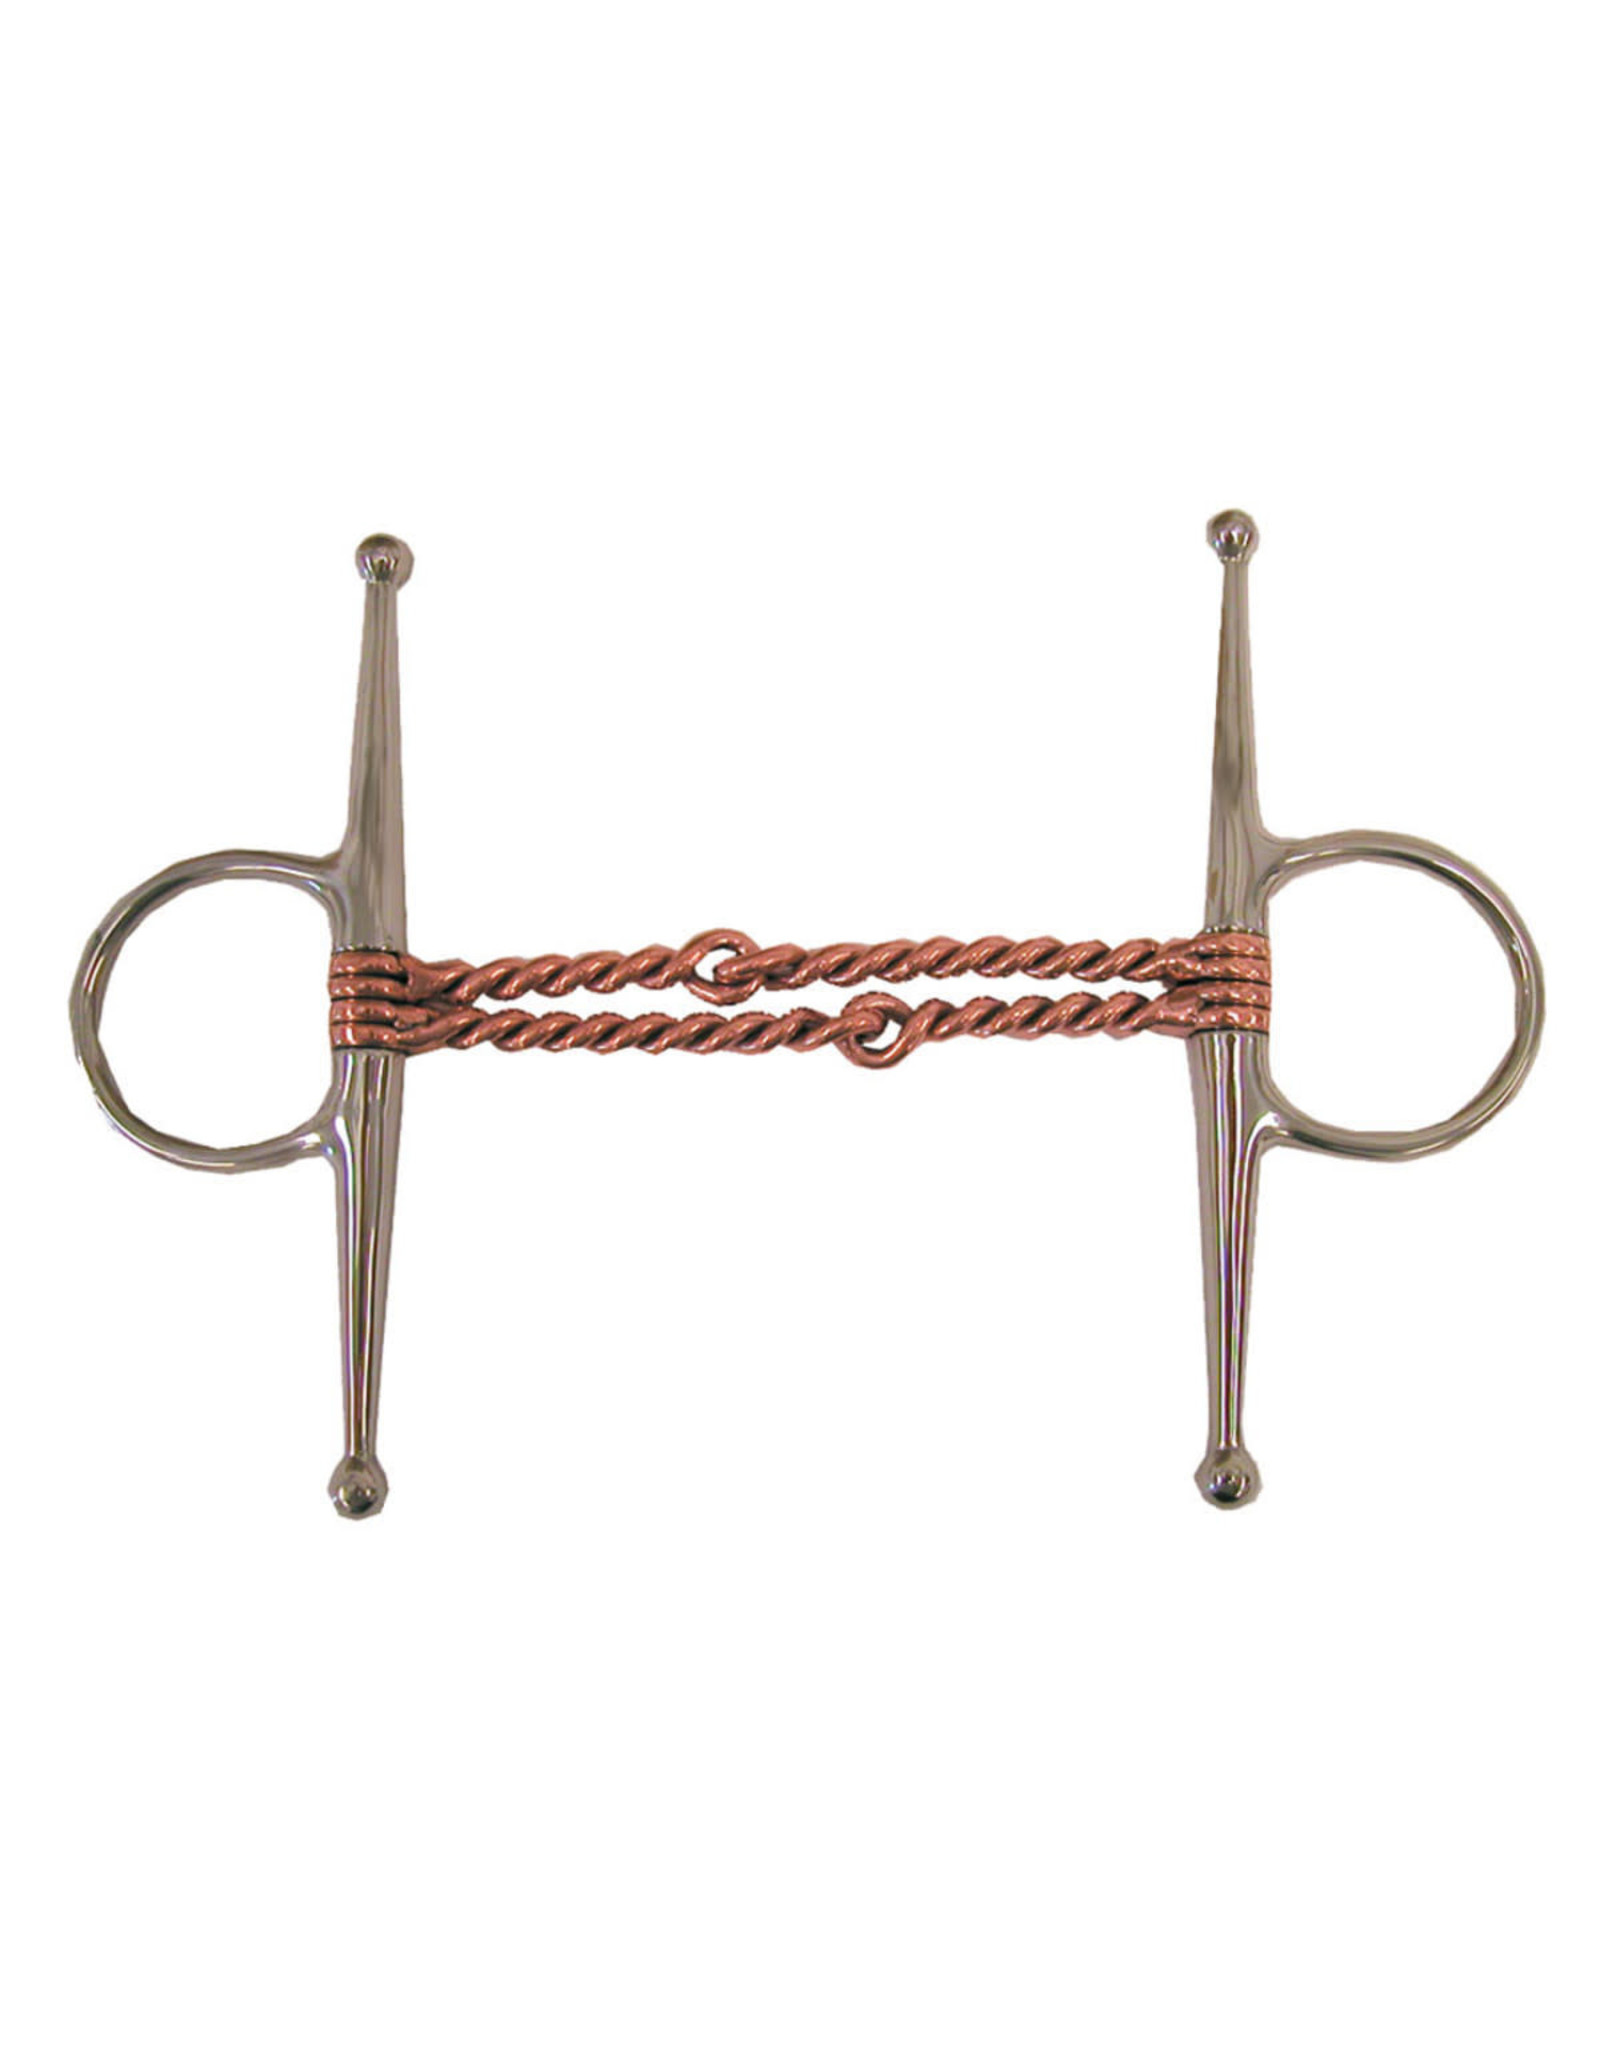 Bit Copper Mouth Double Twisted Wire Full Cheek Bit 5"